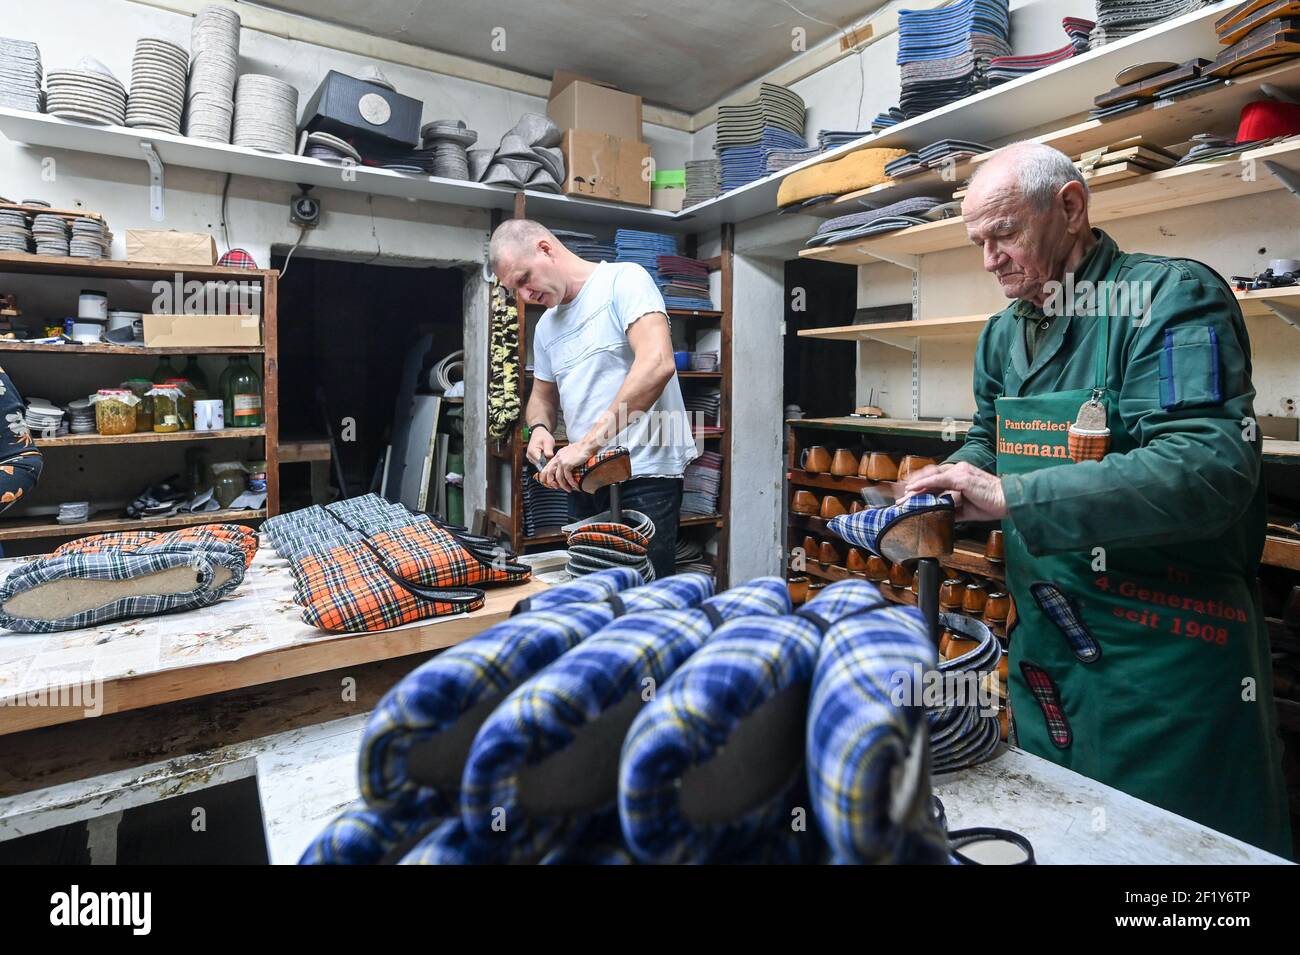 04 March 2021, Berlin: Owner Reno Jünemann (l) and his father, 82-year-old Günter Jünemann, use pincers to pull the fabric over lasts for the slipper into shape in the family business Jünemanns Pantoffeleck in Torstraße. Slippers have been produced here for over 100 years. Since 1992 the company is the last of its kind in Berlin. It is now run by the fourth generation. Slippers in all sizes and with different soles are produced by hand in 15 different colours and patterns. Currently there are a lot of online orders in the Corona pandemic. Photo: Jens Kalaene/dpa-Zentralbild/ZB Stock Photo